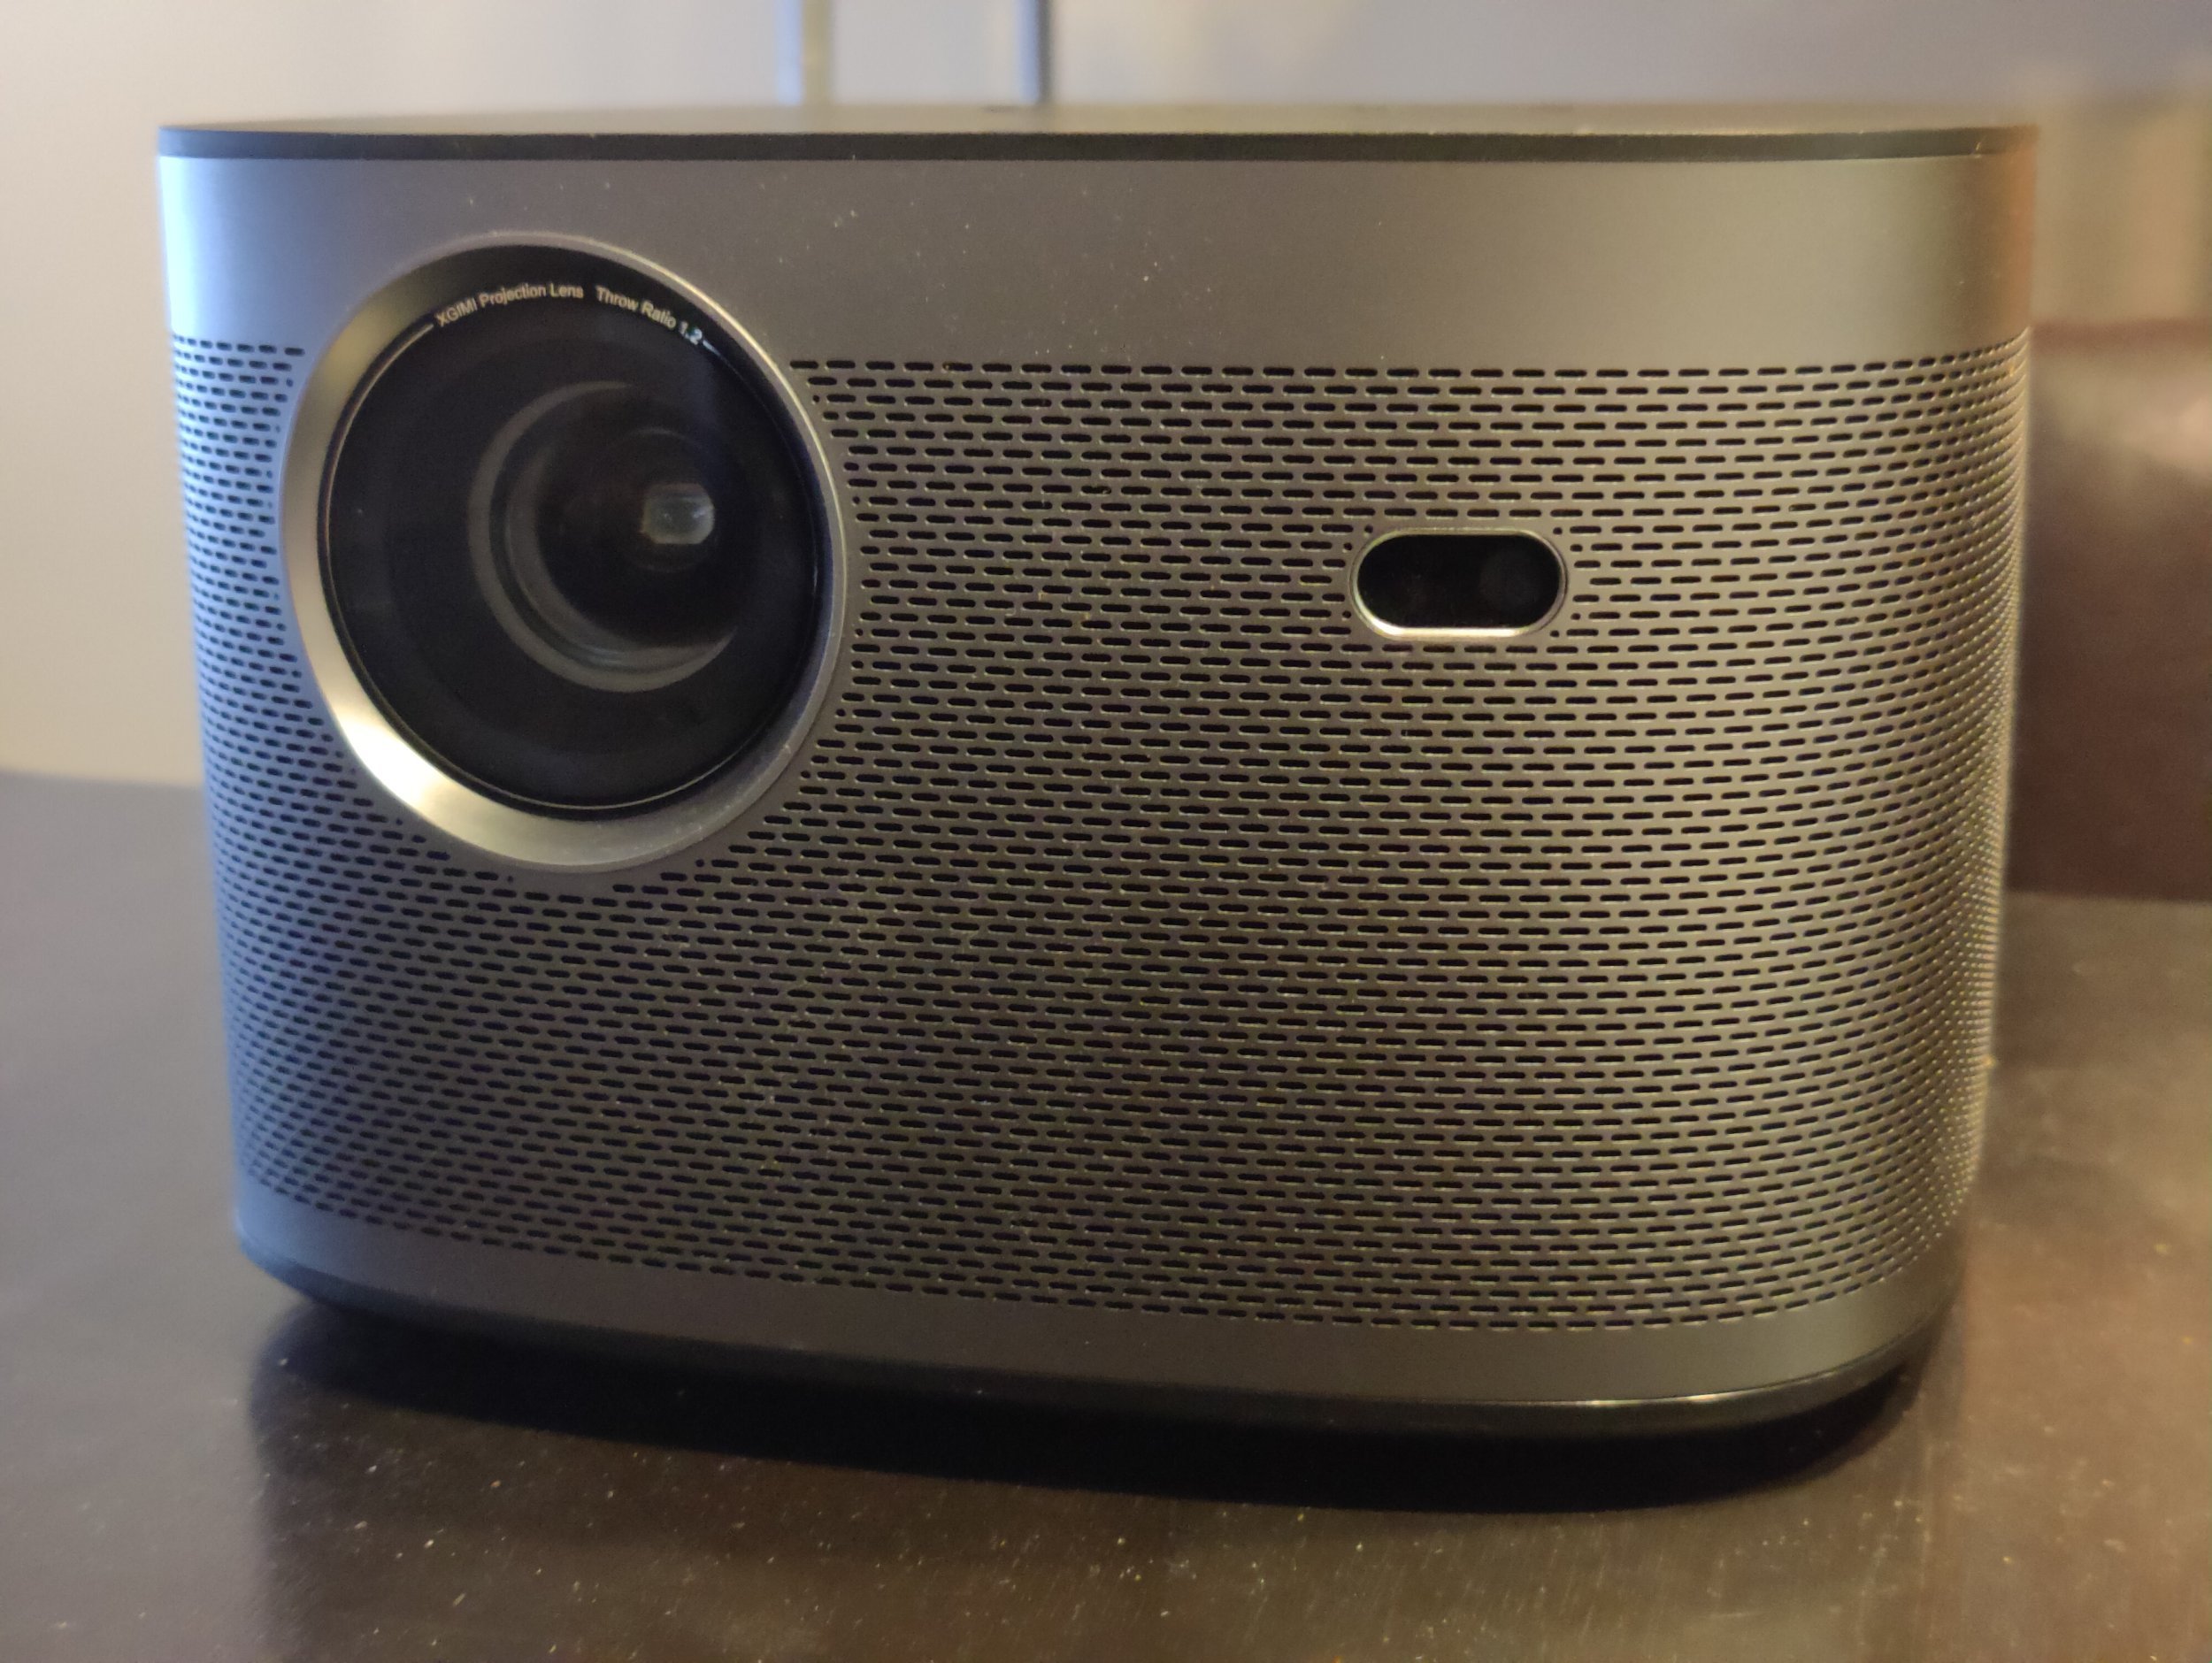 XGIMI Horizon 1080p Projector Review: Crystal Clear Picture With Great  Sound